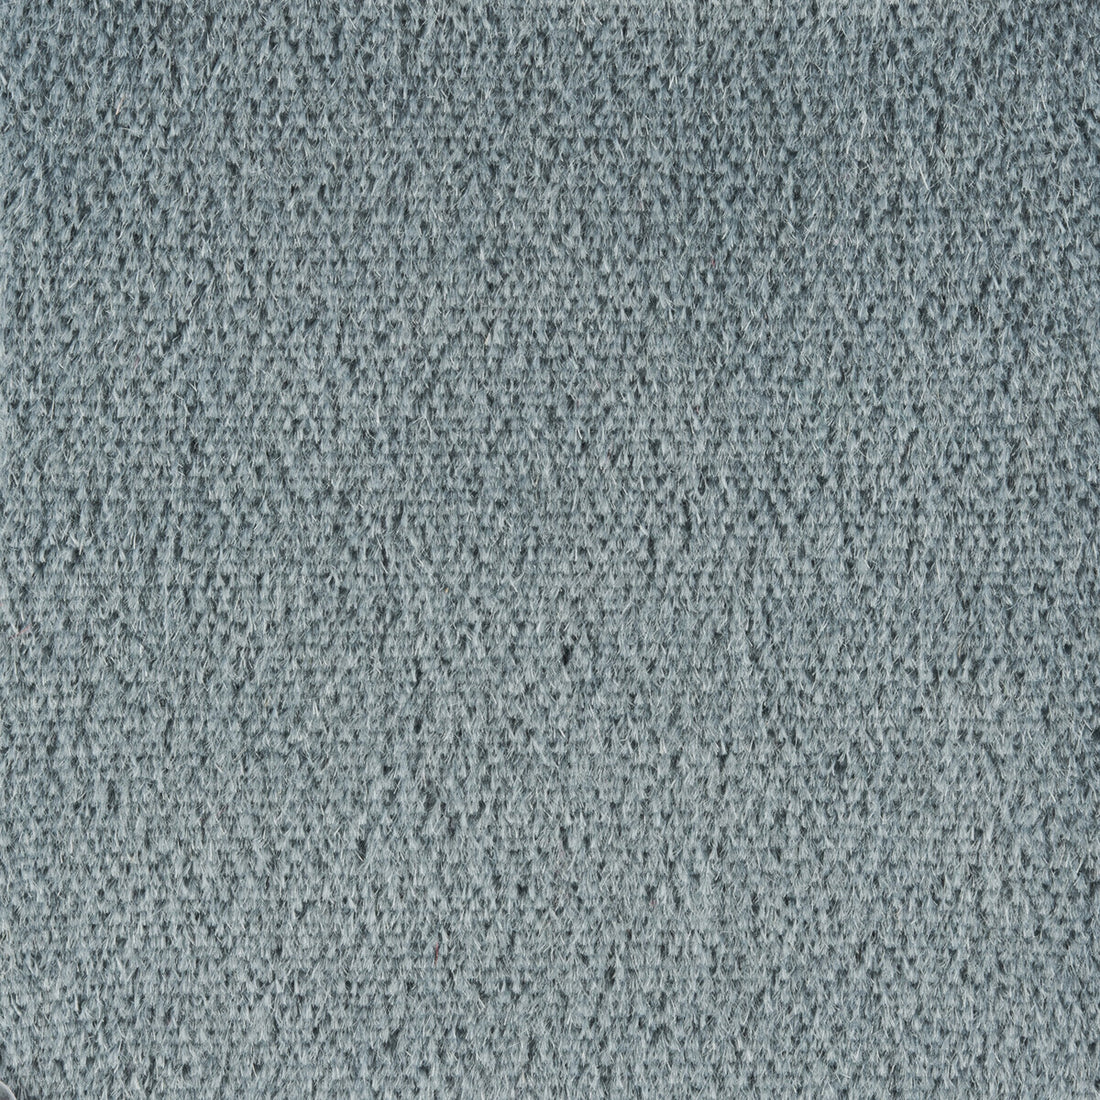 Autun Mohair Velvet fabric in slate blue color - pattern BR-89778.280.0 - by Brunschwig &amp; Fils